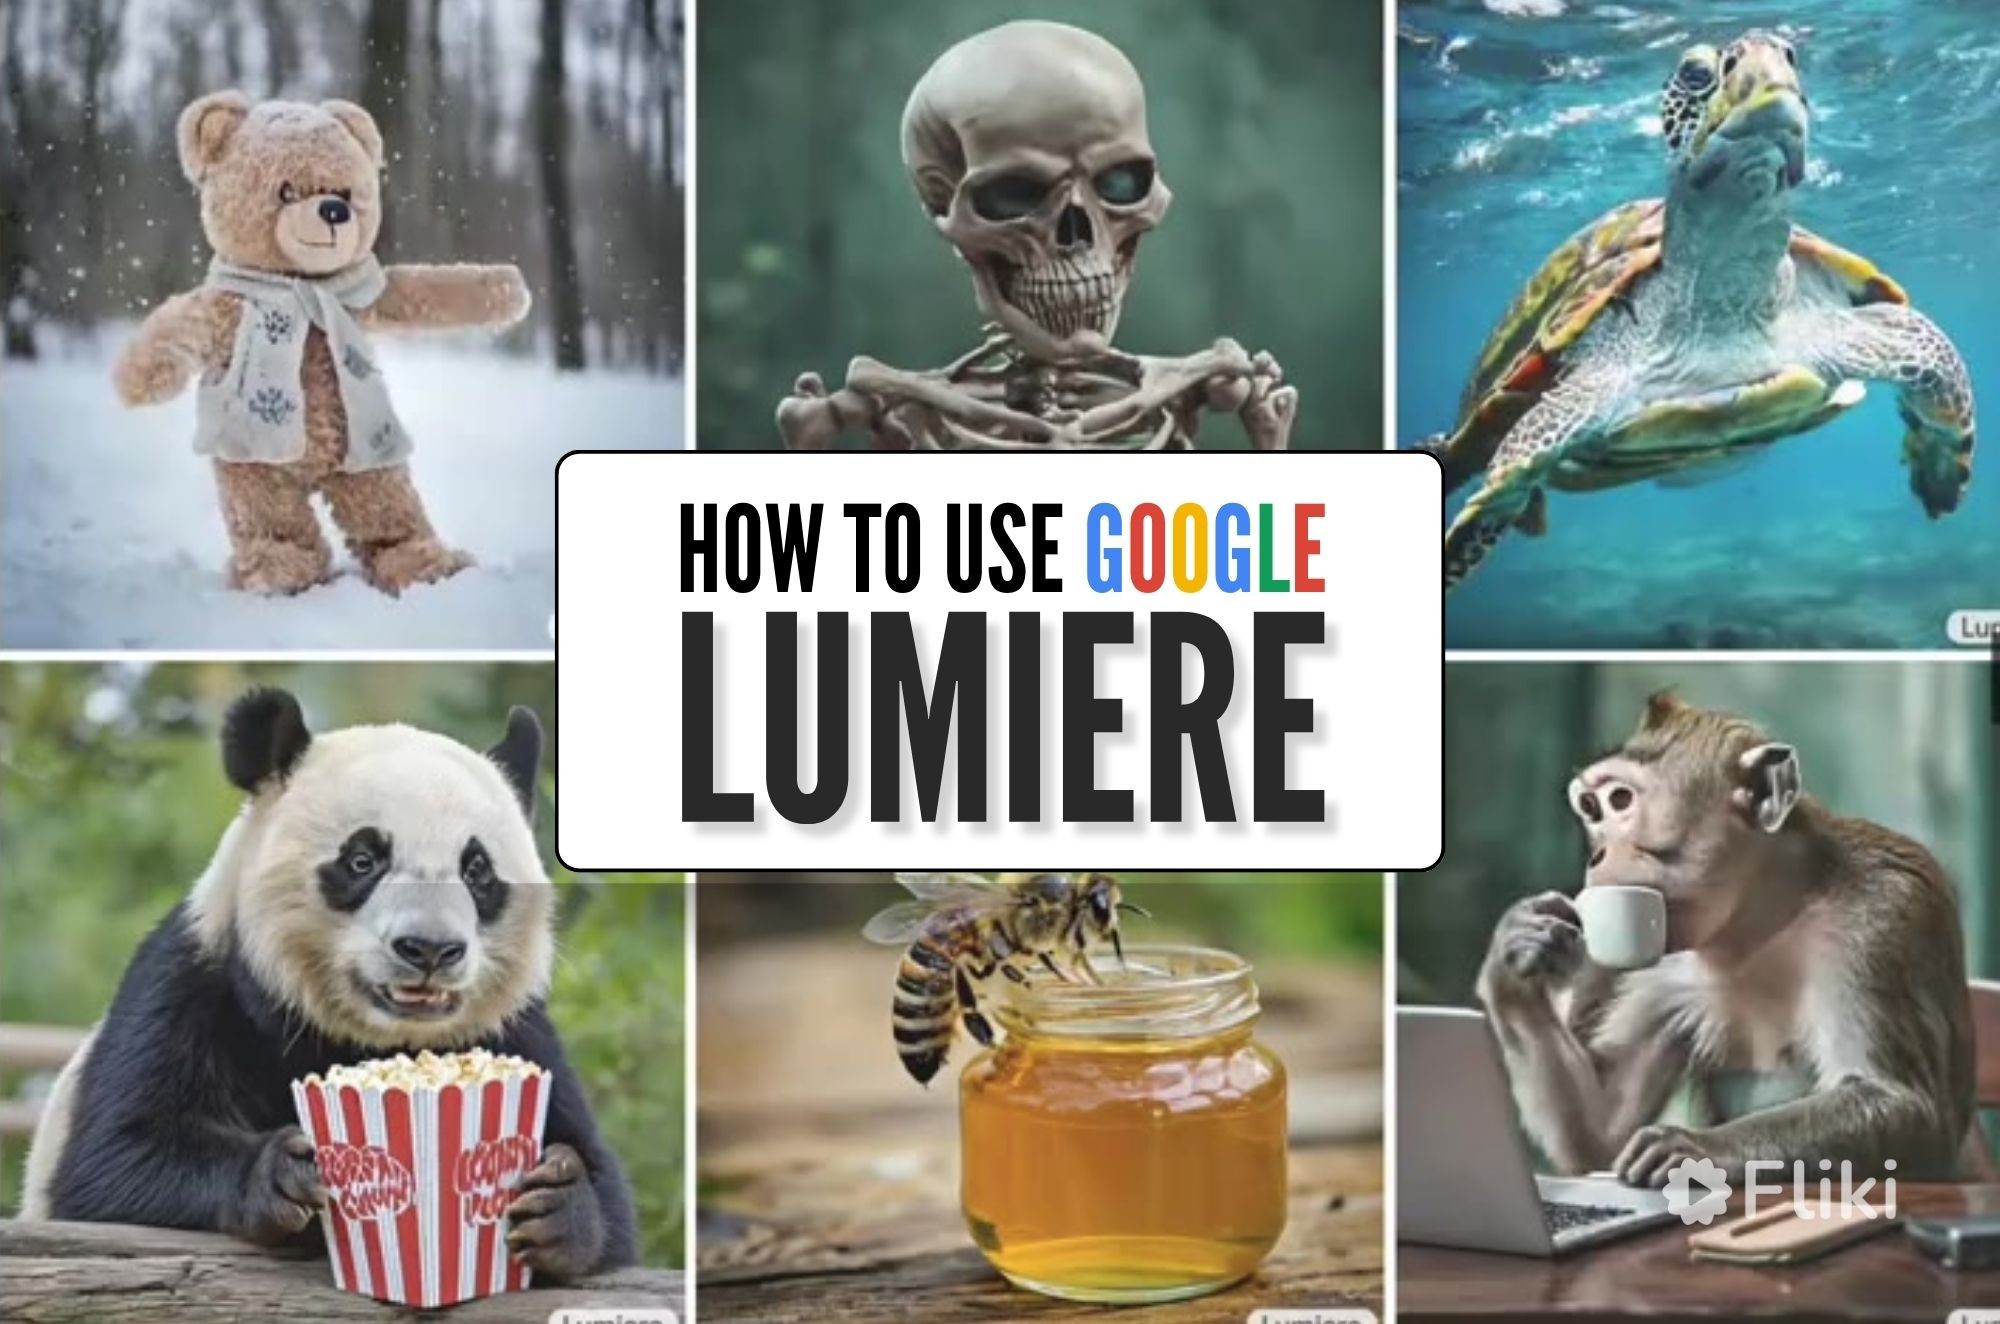 How to Use Lumiere - Google AI Video Generator